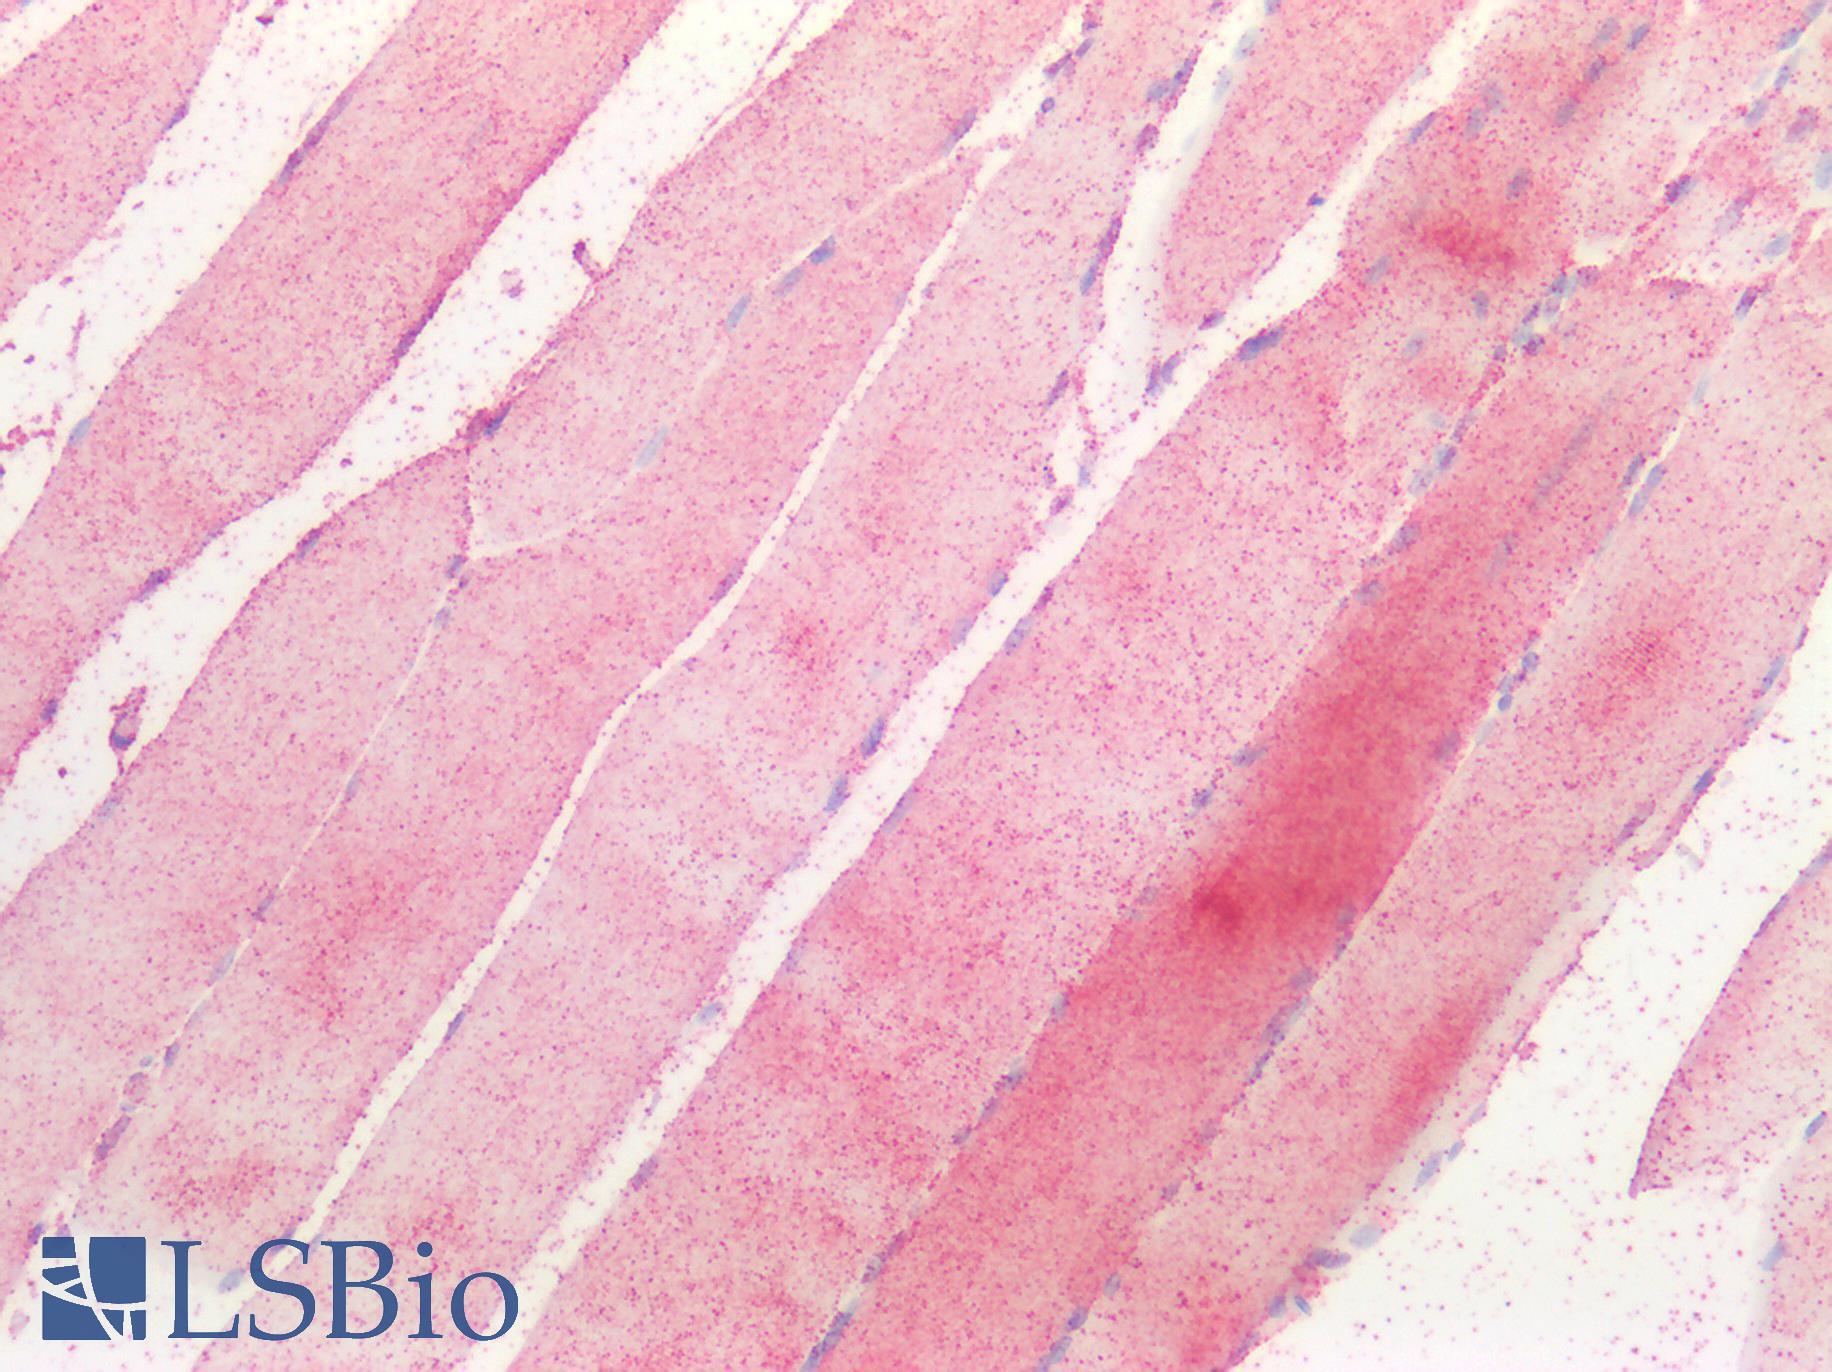 GNA12 Antibody - Human Skeletal Muscle: Formalin-Fixed, Paraffin-Embedded (FFPE)